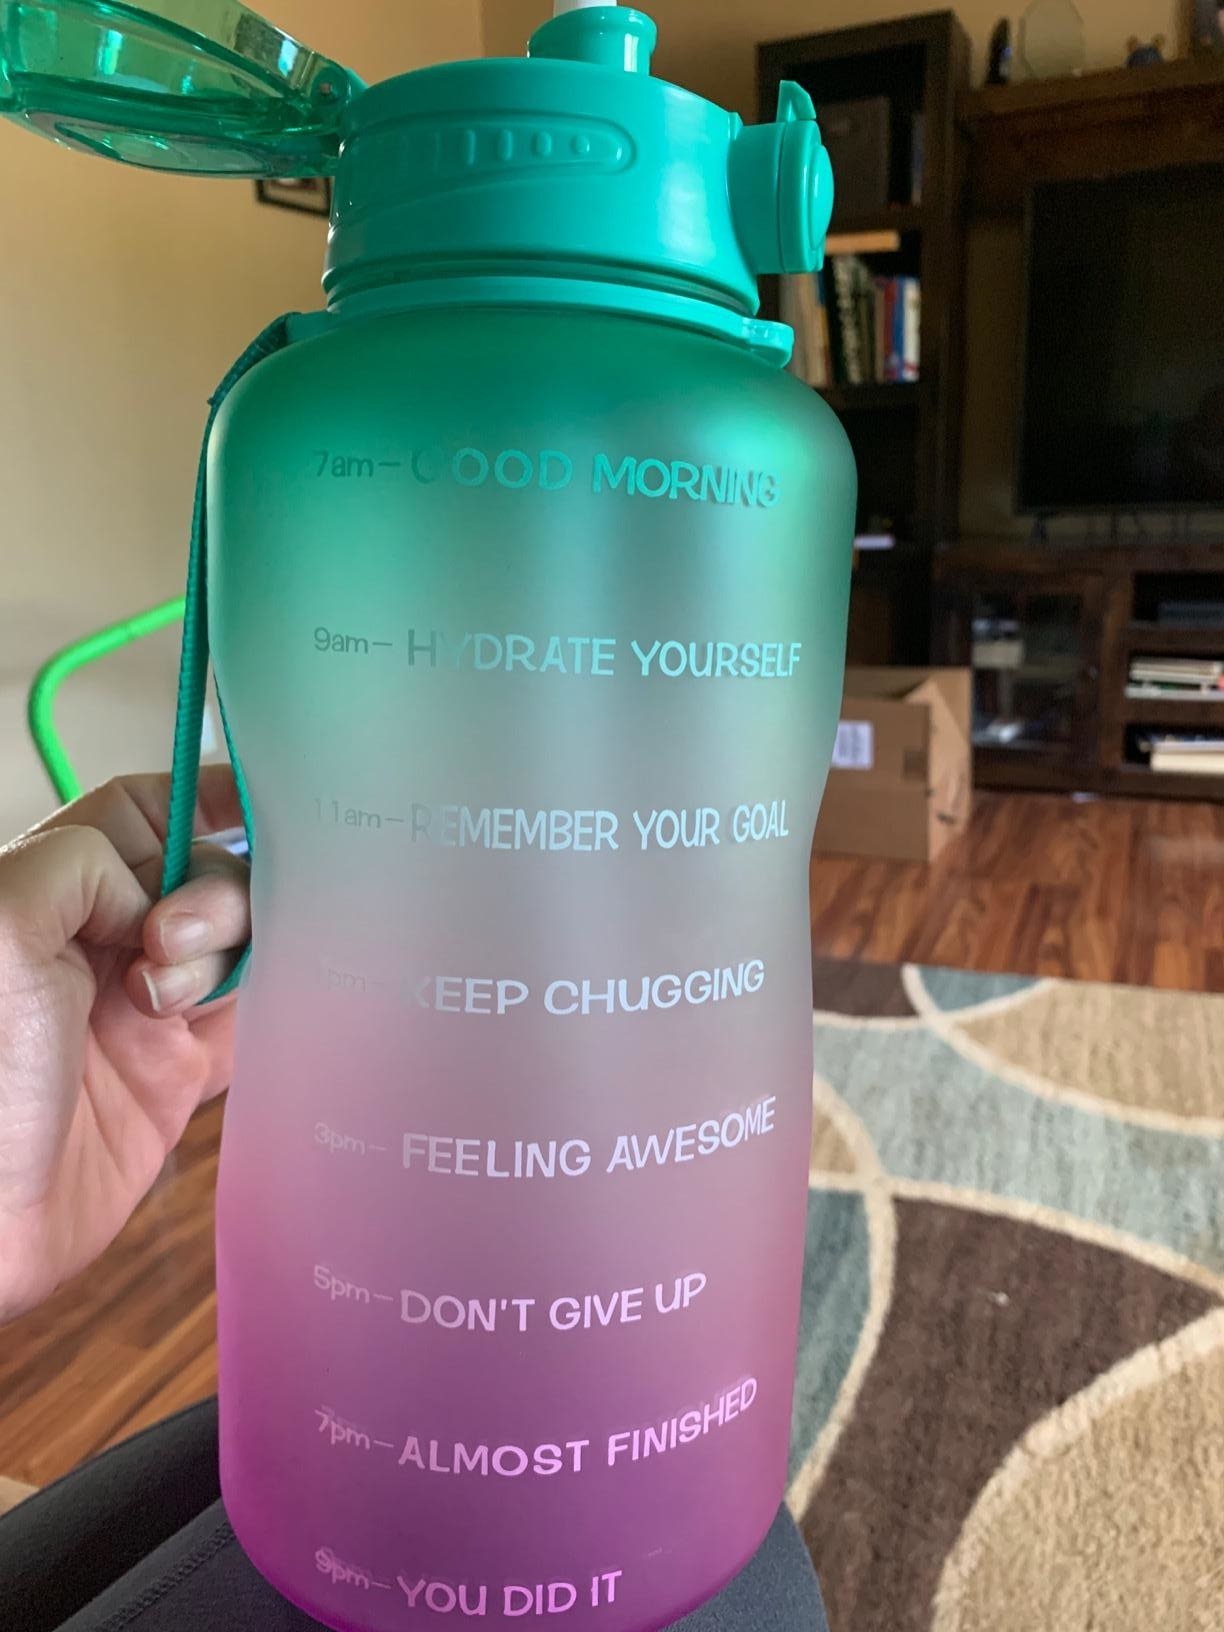 The bottle in pink and green with time stamps and motivational phrases like &quot;keep chugging,&quot; &quot;feeling awesome,&quot; and &quot;don&#x27;t give up&quot;